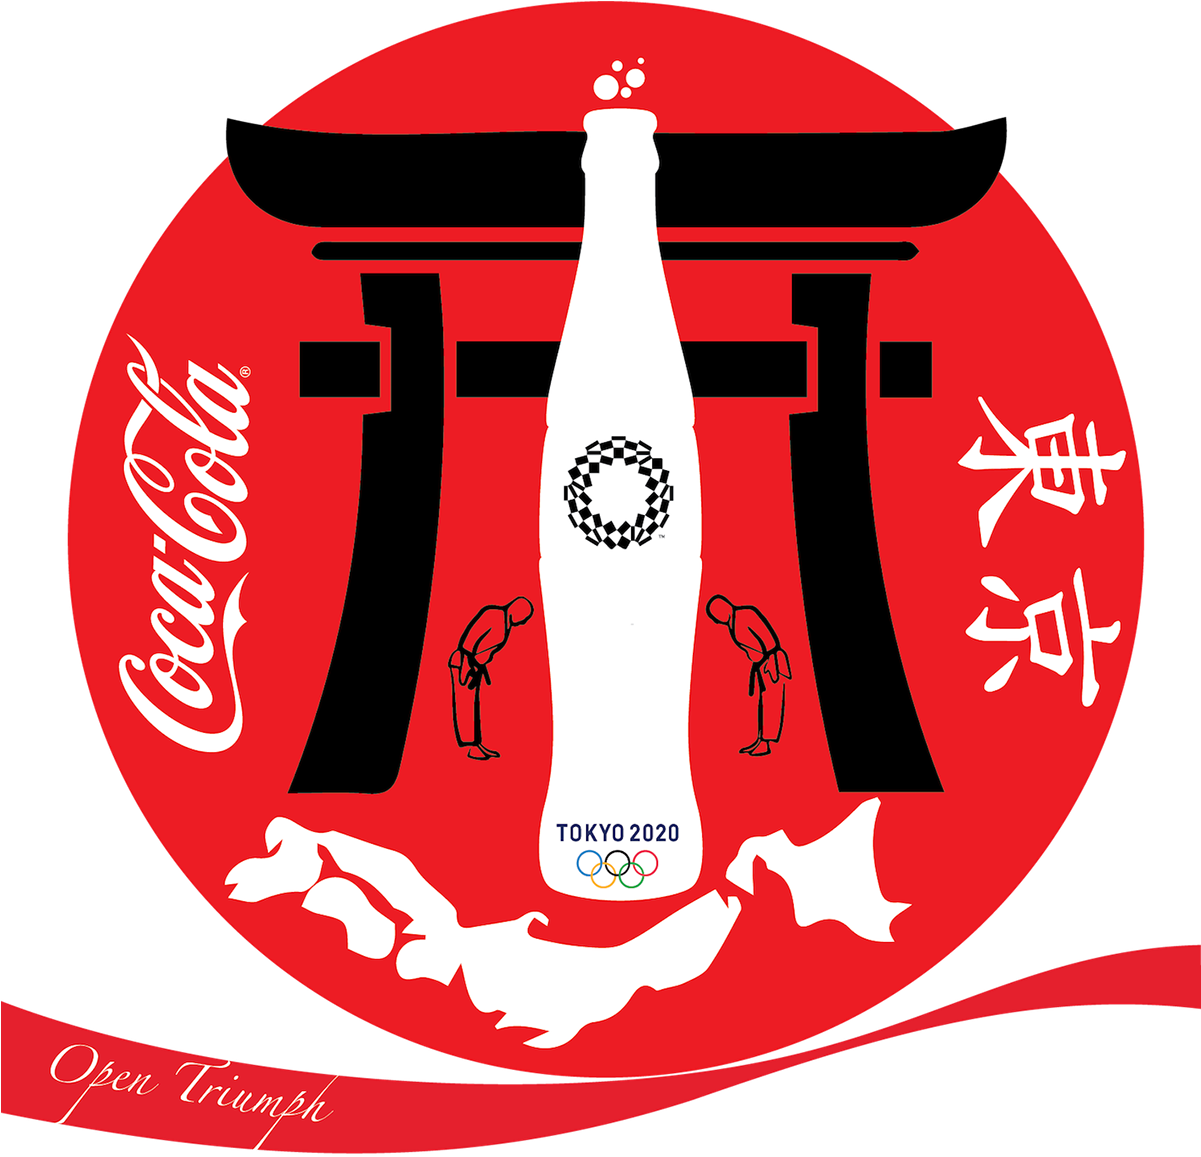 A Red Circle With A Black And White Logo With A White Bottle And A Red Circle With Black Text